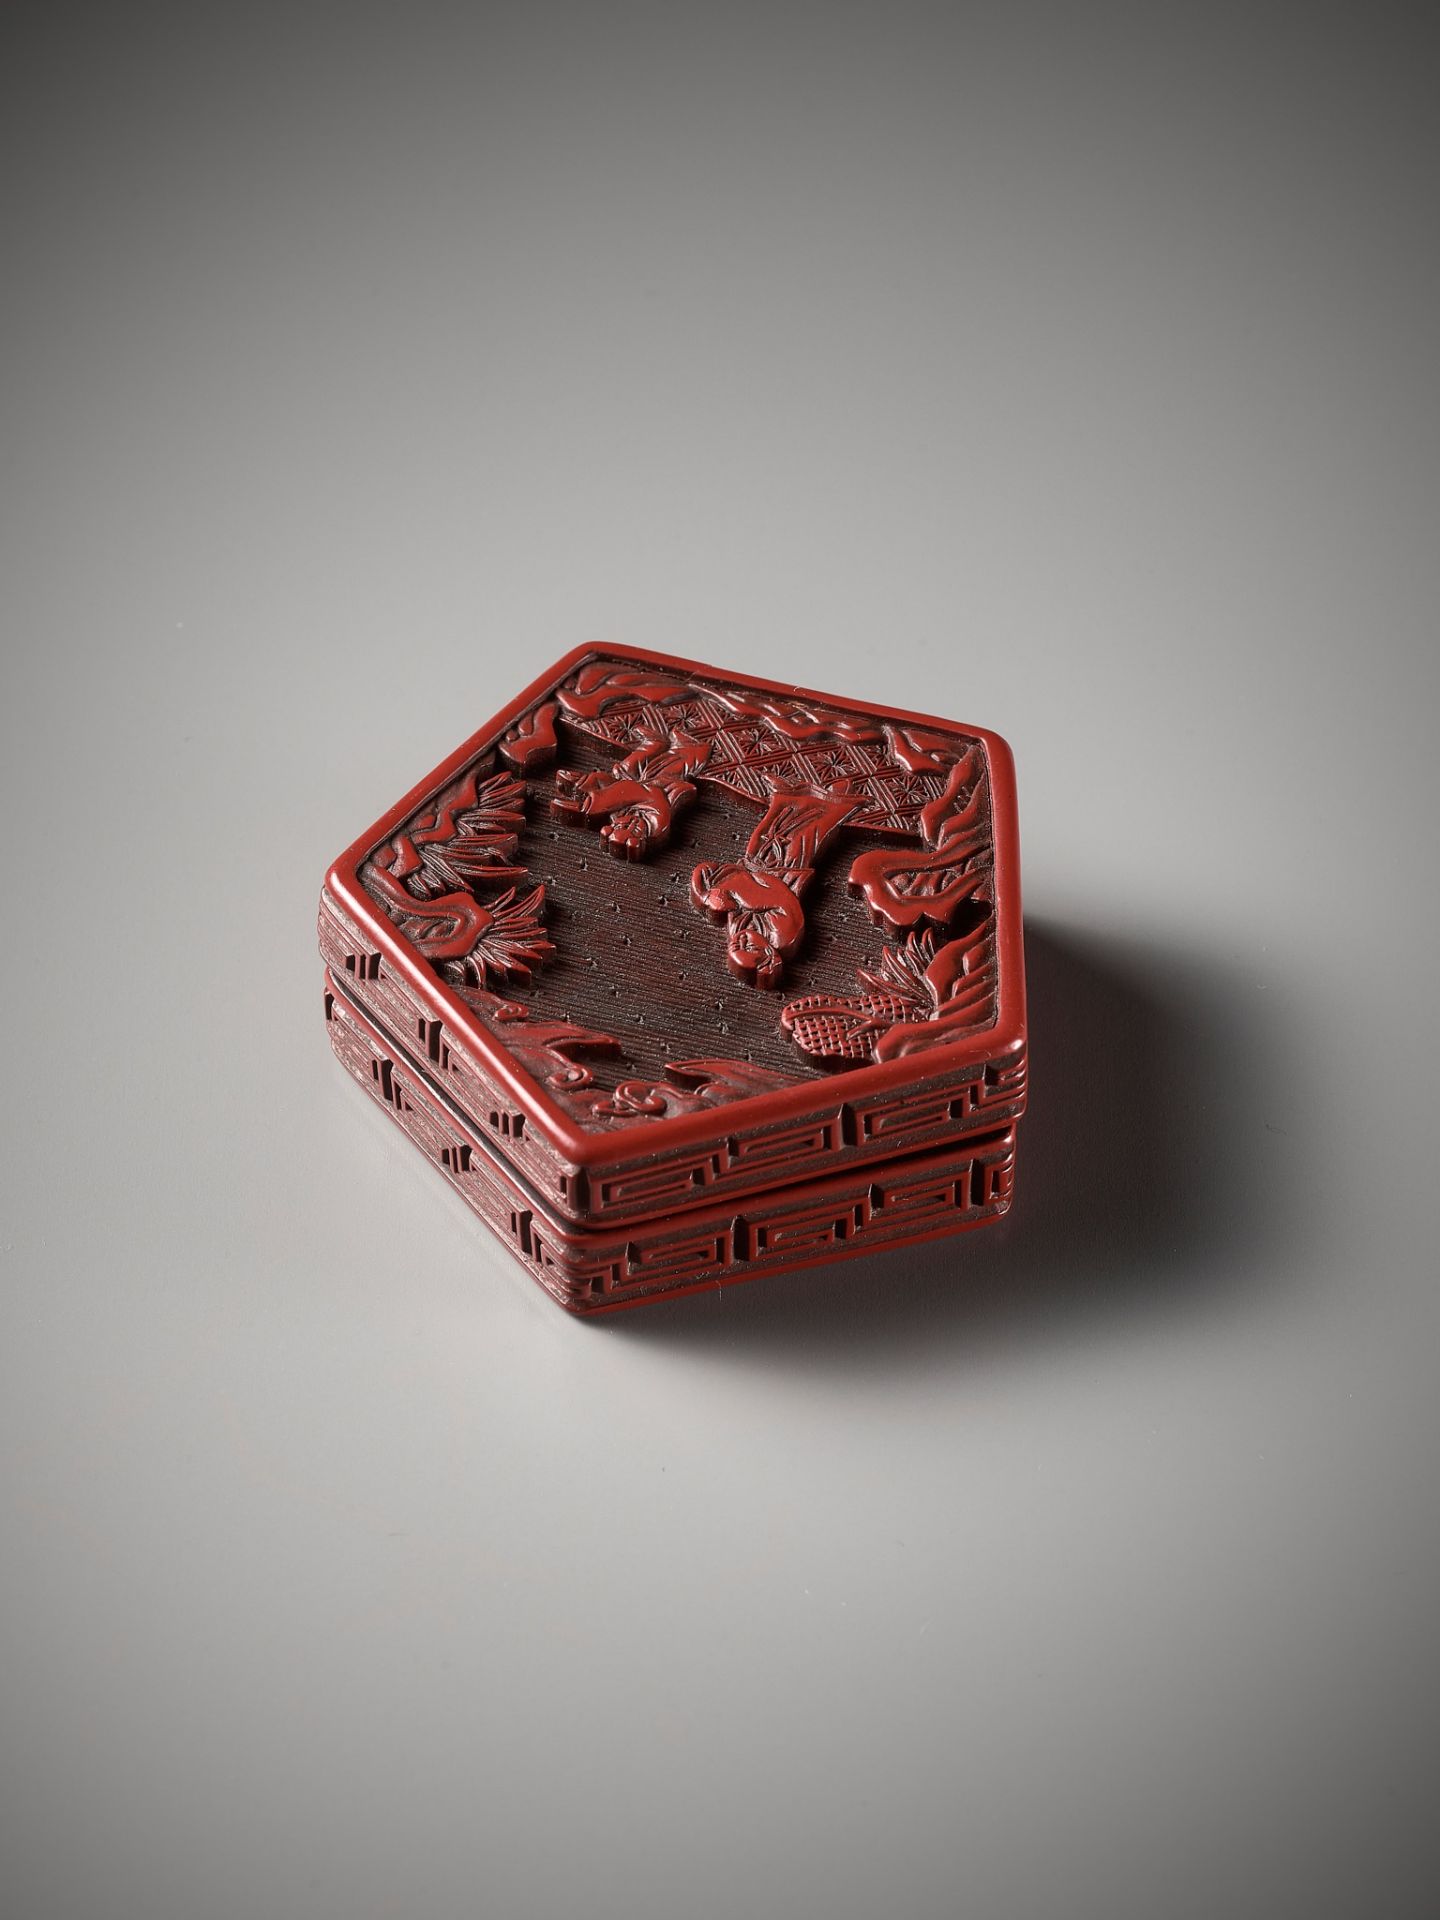 A SMALL CINNABAR LACQUER BOX AND COVER, YUAN TO MID-MING DYNASTY - Image 9 of 13